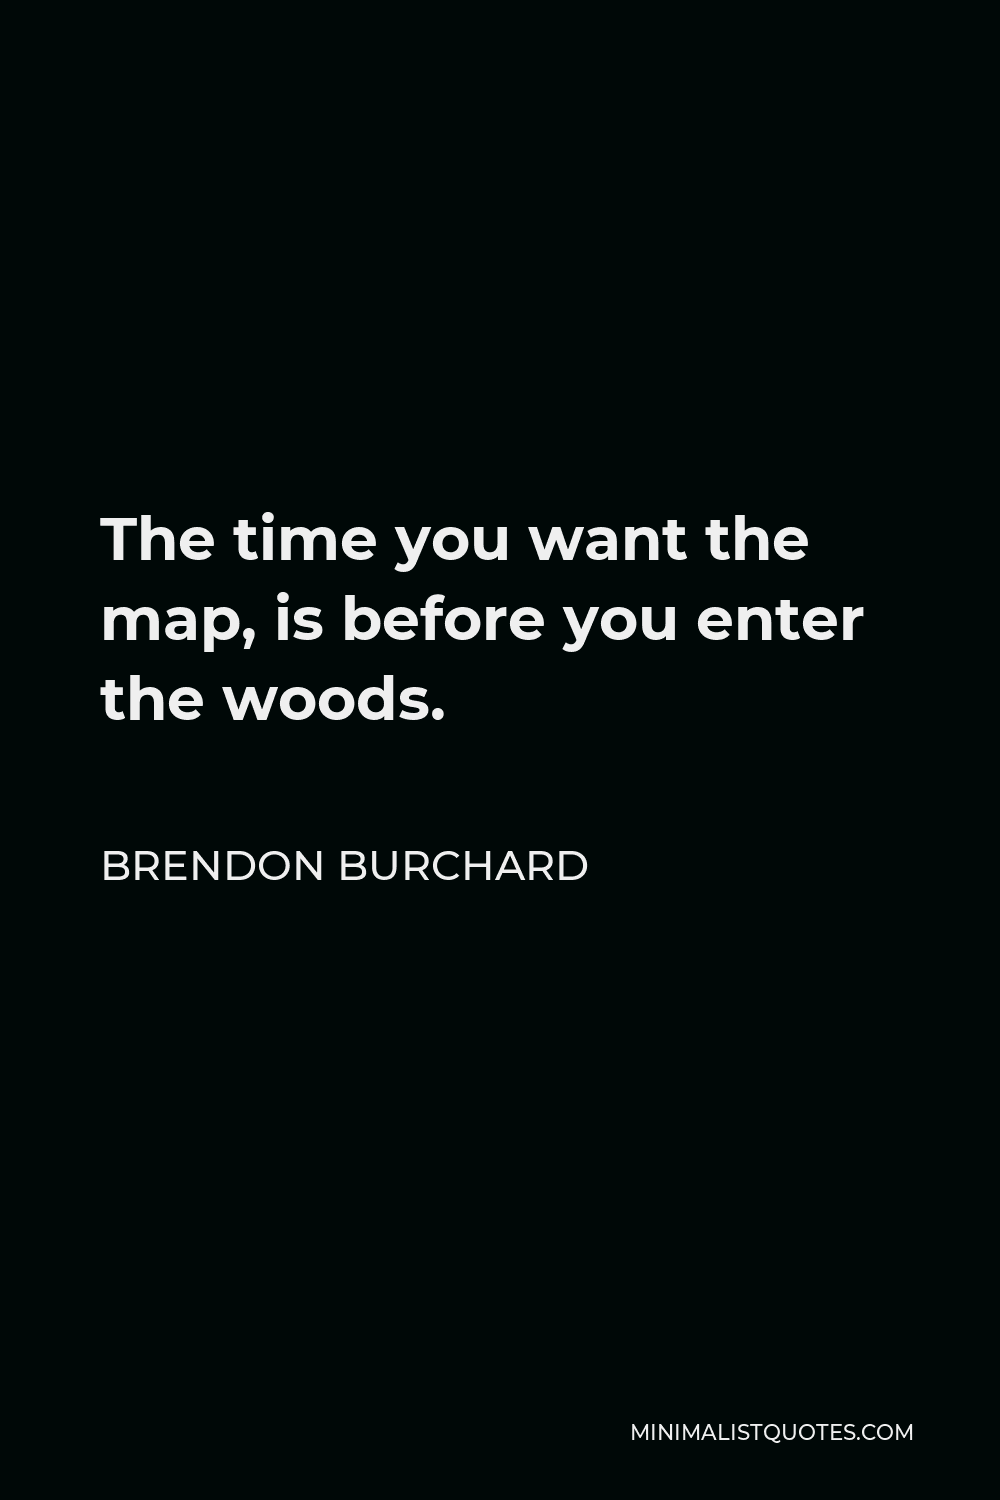 Brendon Burchard Quote - The time you want the map, is before you enter the woods.